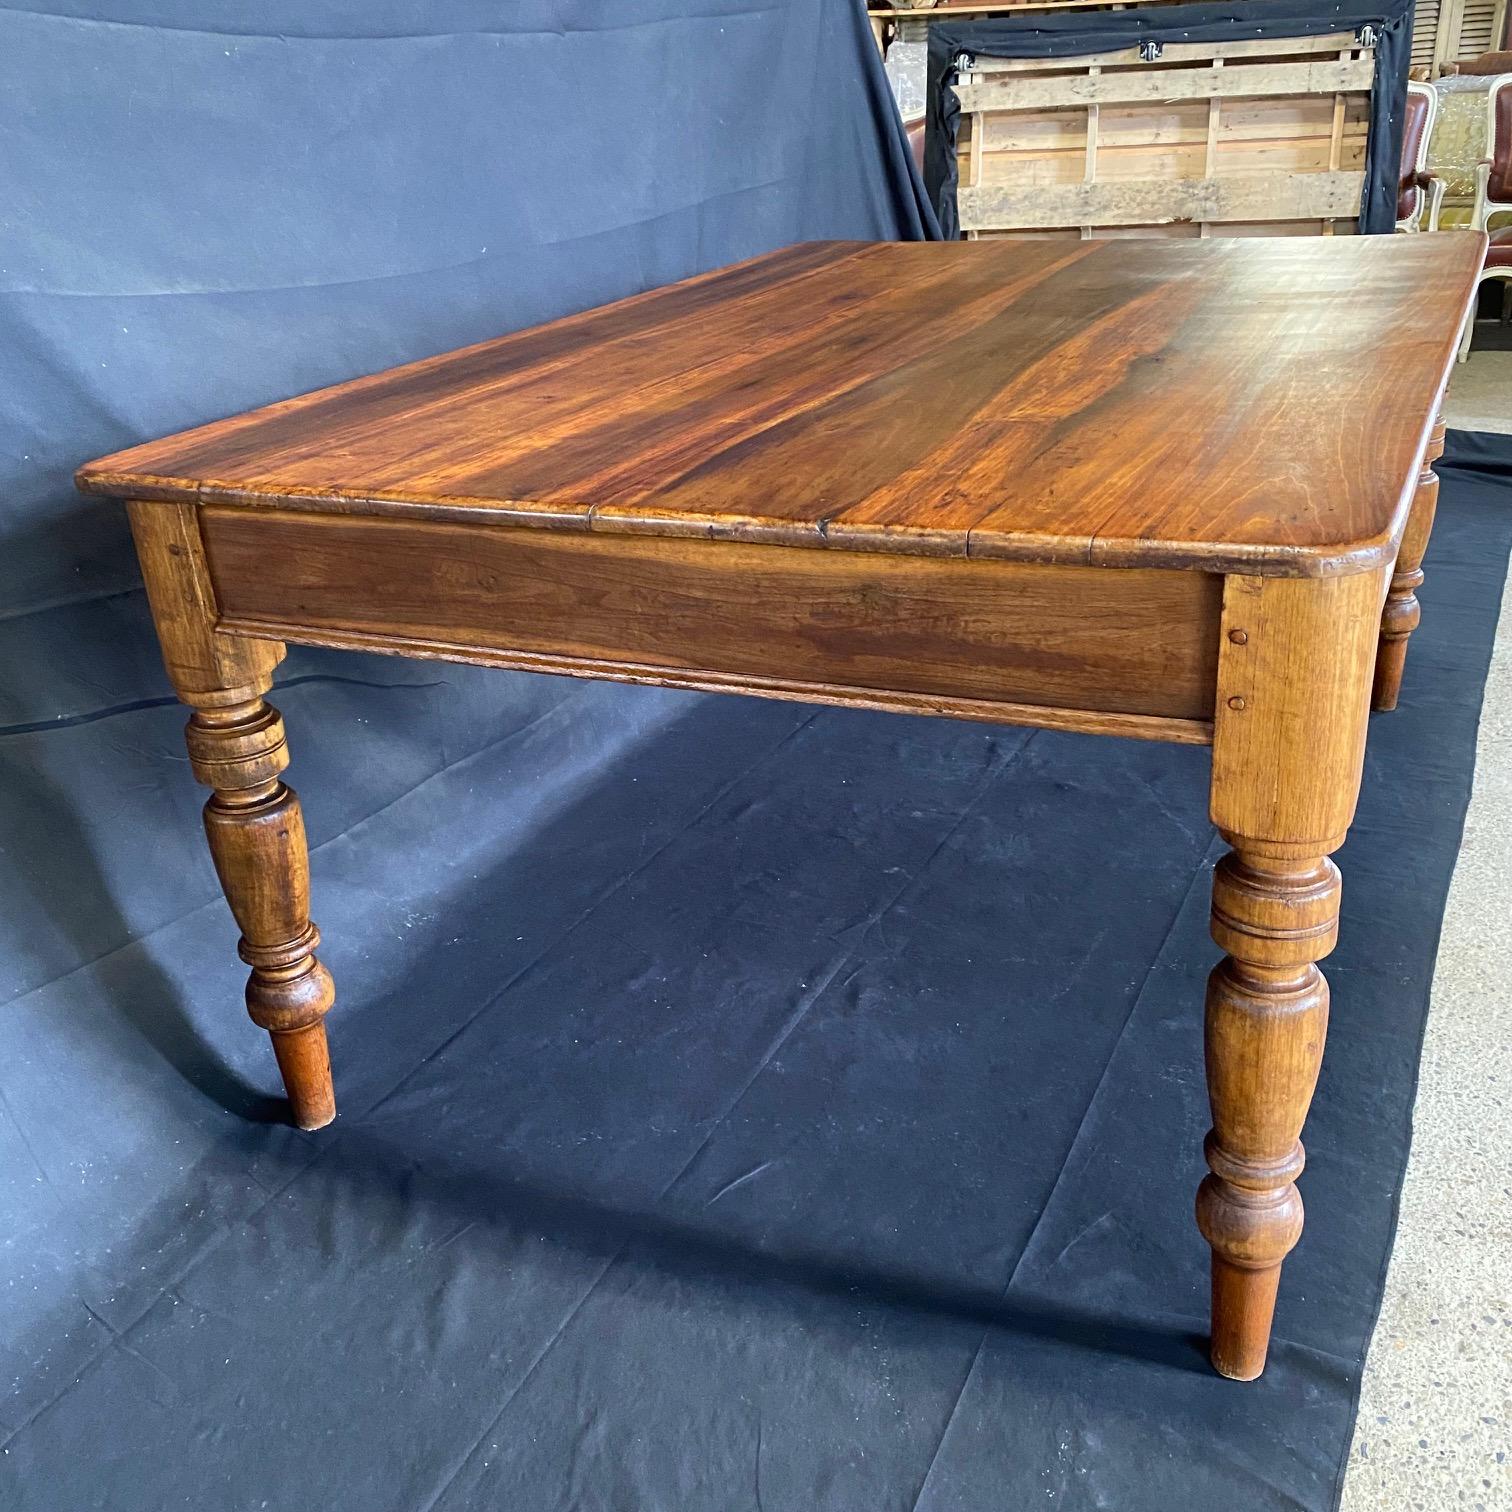 British country pine farmhouse dining table having a character rich plank wood top with tongue in groove joinery and solid round turned legs that give the table a very solid substantial feel.  Excellent joinery and craftsmanship with a lovely aged